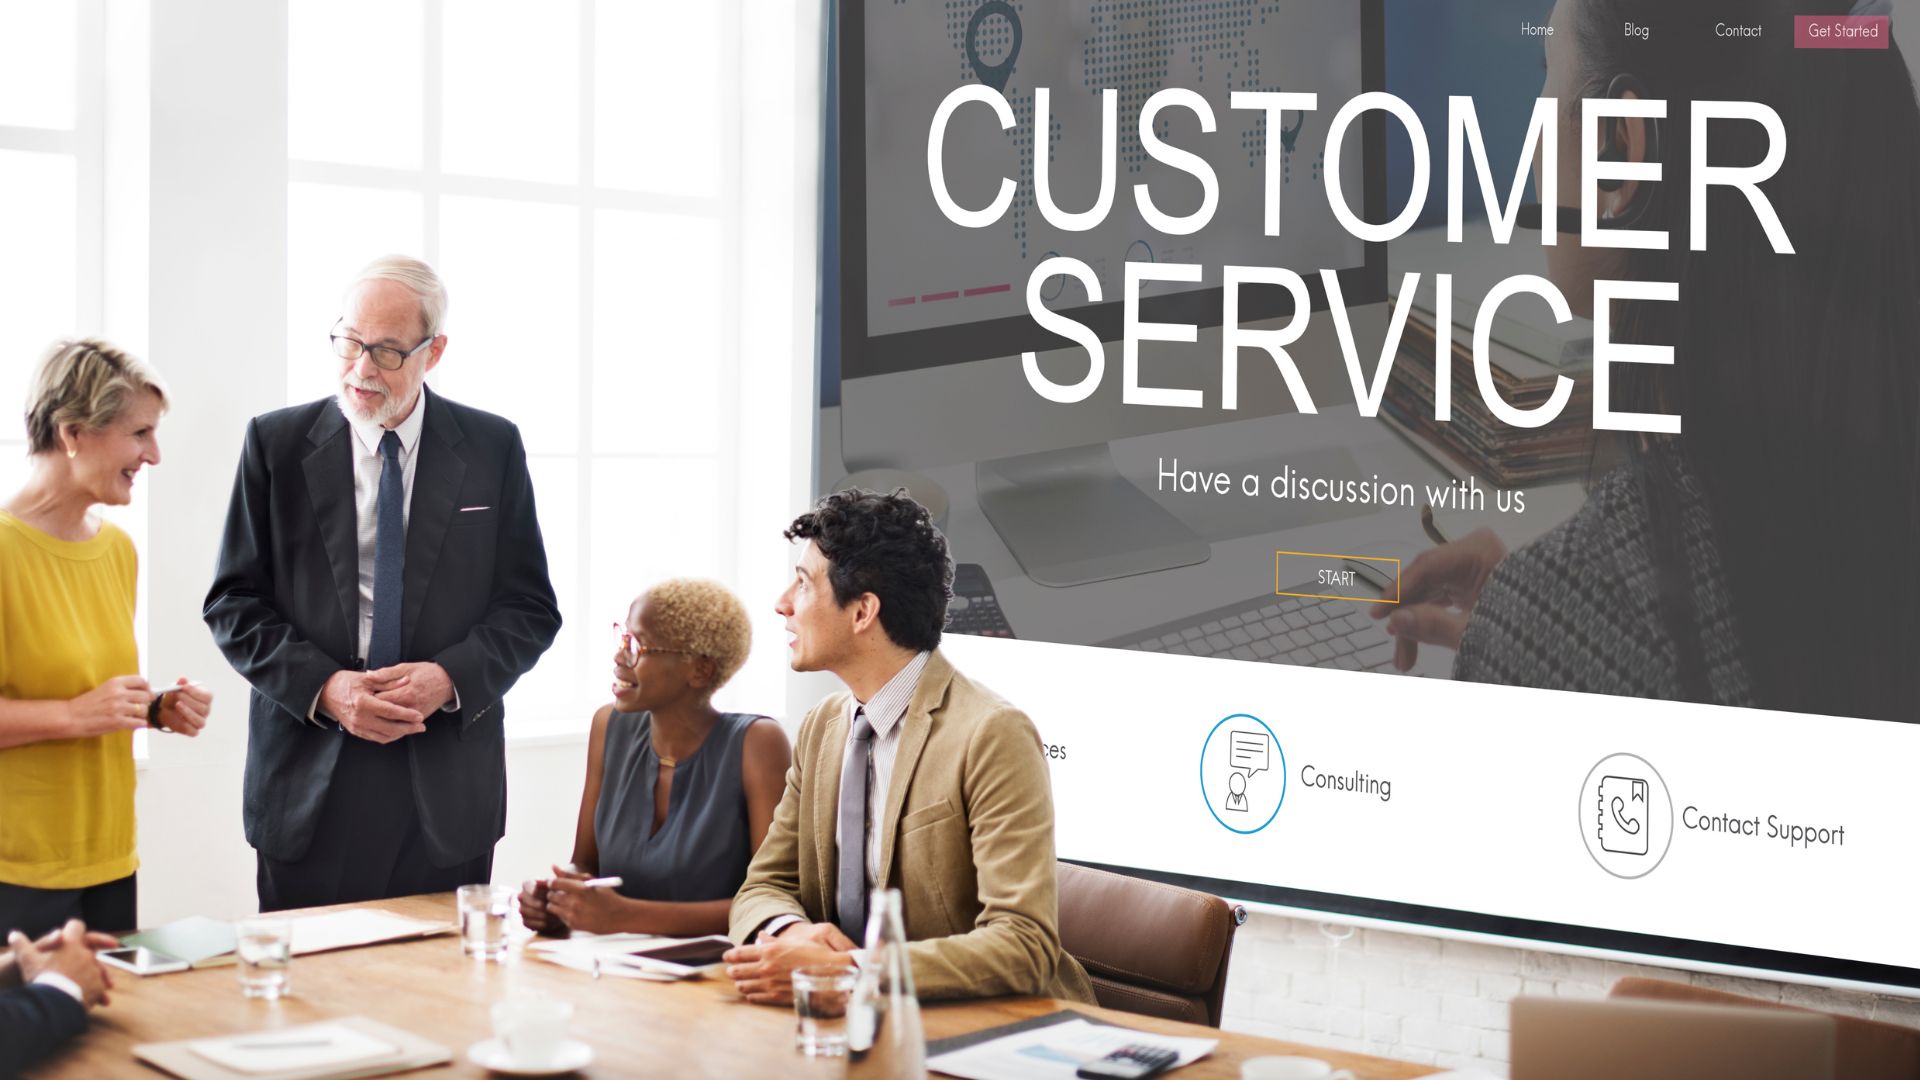 Customer Experience vs Customer Service: What are they, and how are they different?